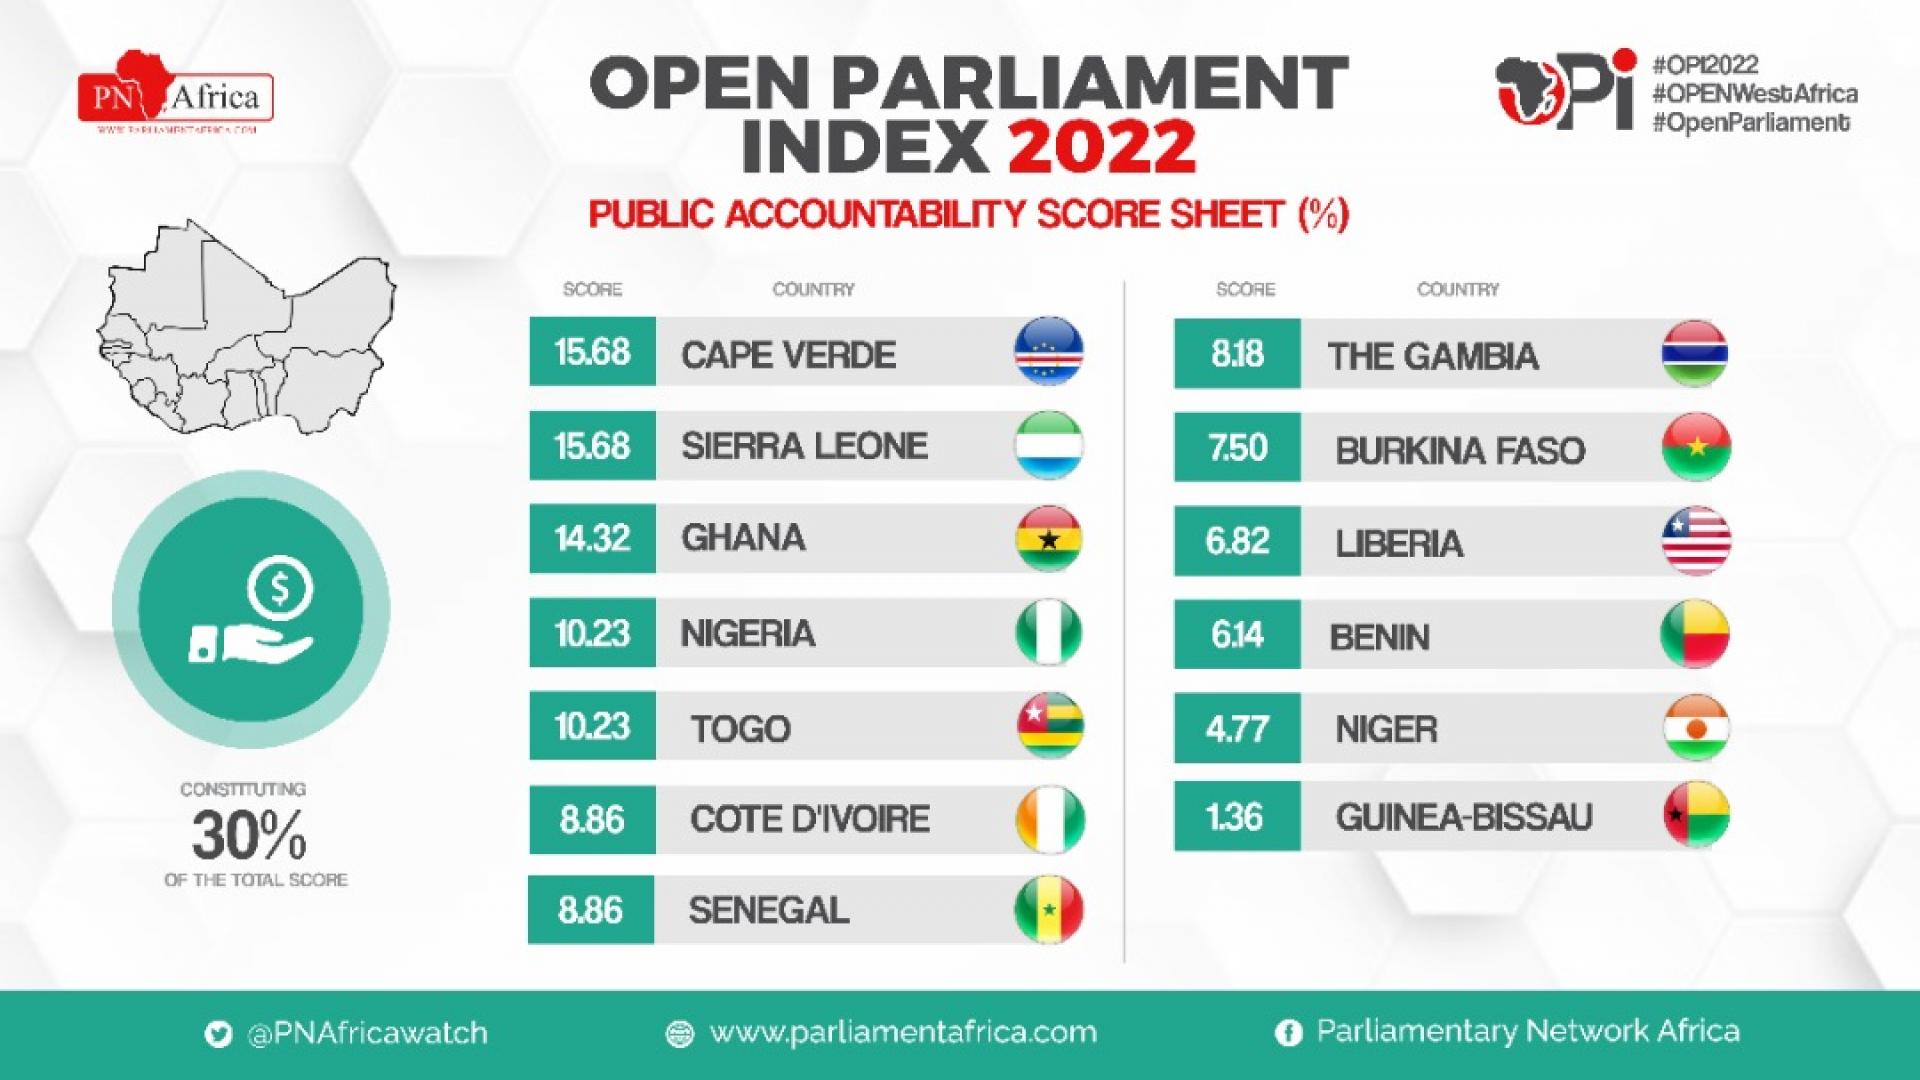 Open Parliament Index score sheet of the public accountability indicator where Sierra Leone and Cape Verde are joint first followed by Ghana, Nigeria and Togo in the top five